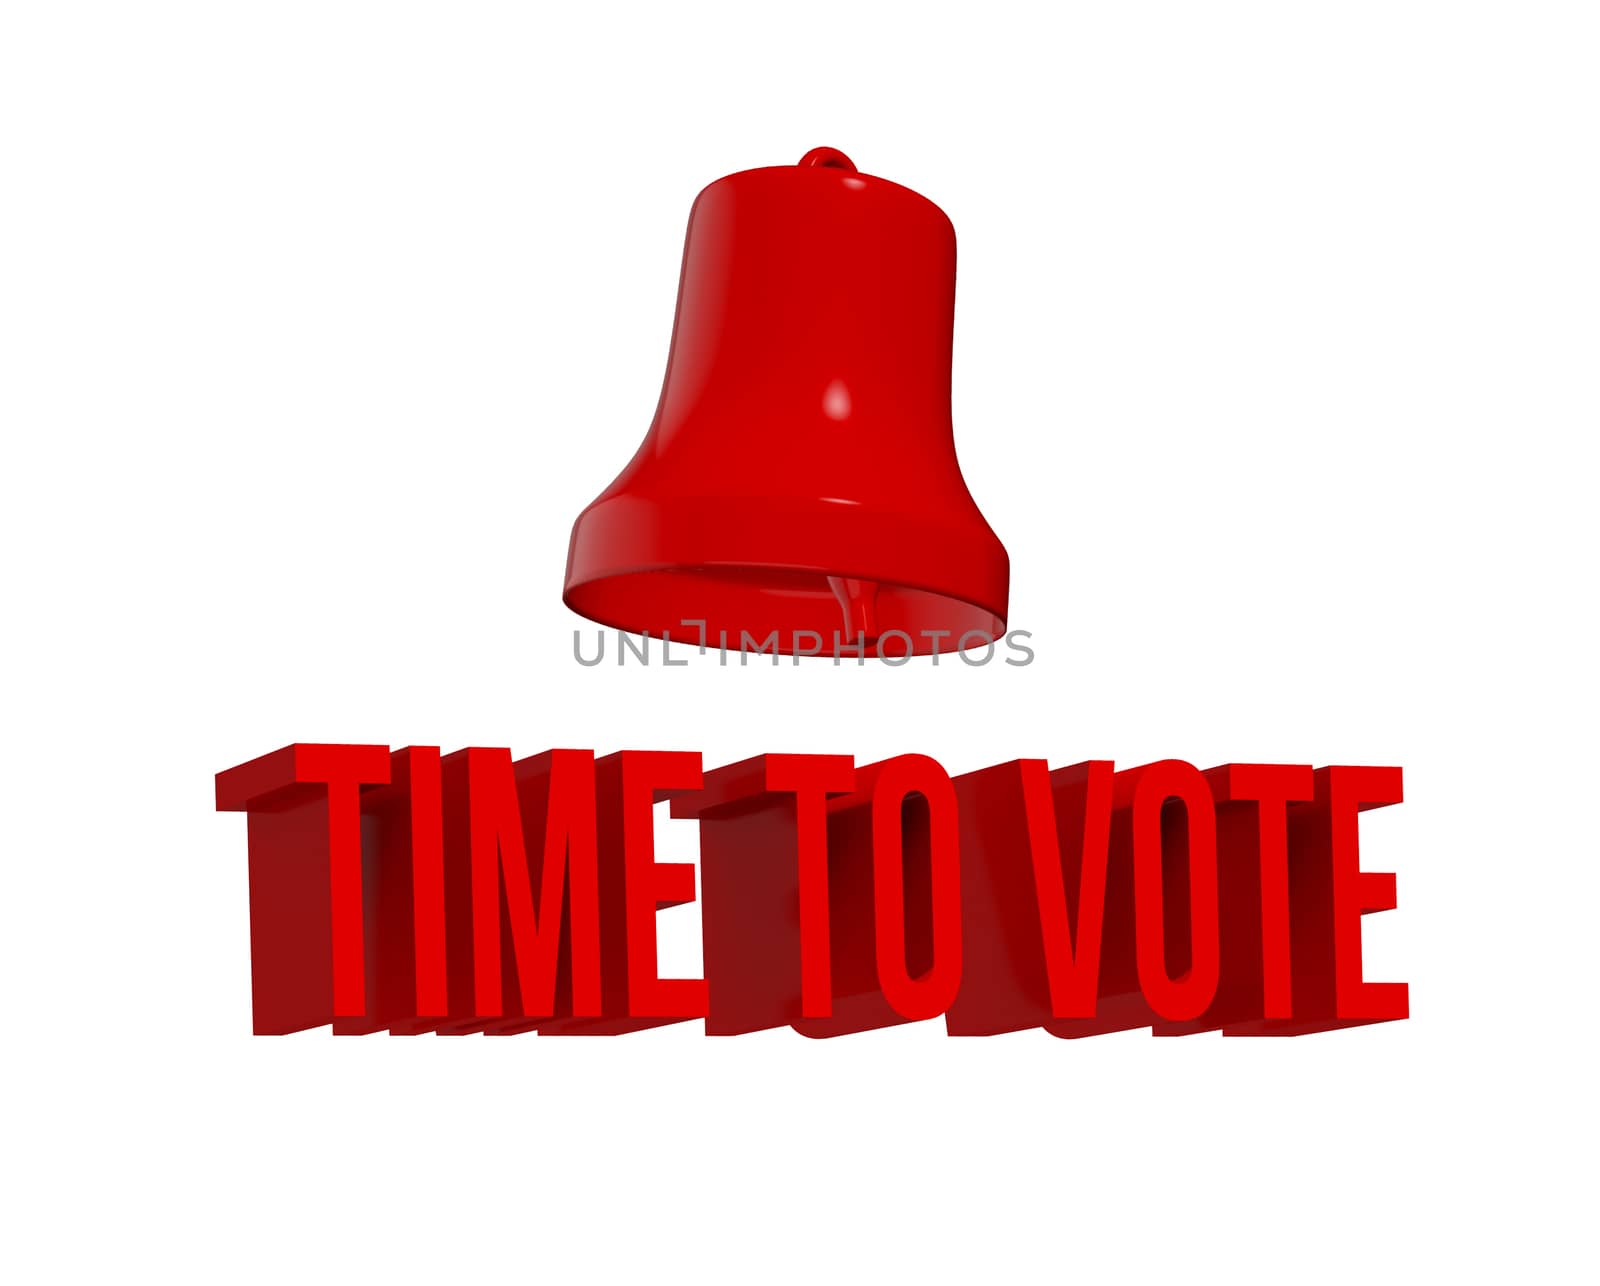 3d render illustration of Time To Vote sign with red alarm bell